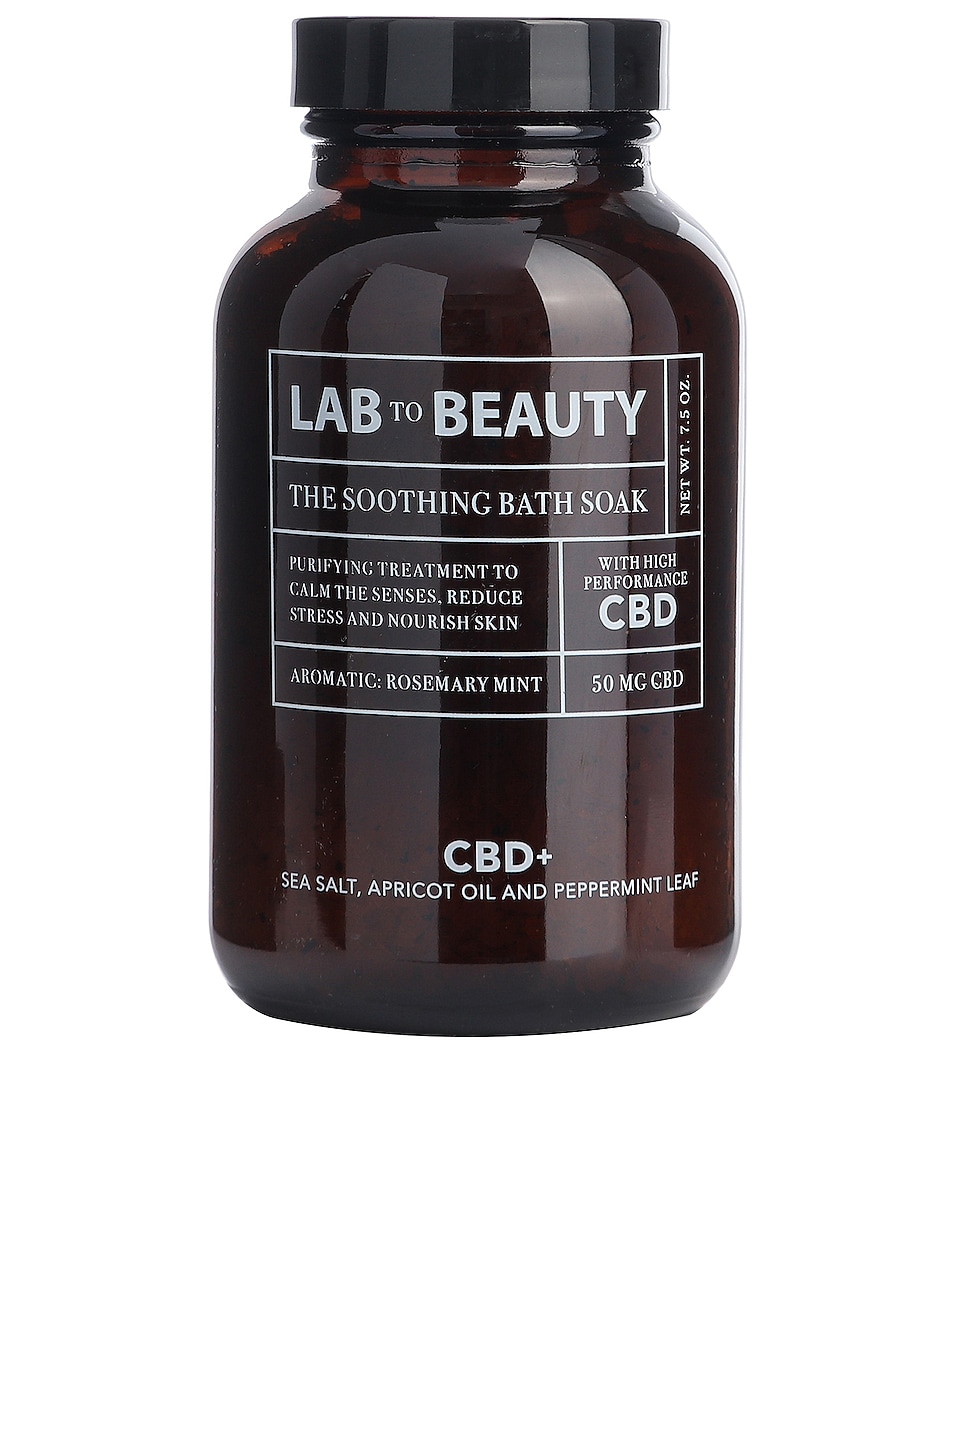 LAB TO BEAUTY THE SOOTHING BATH SOAK,LABR-WU12